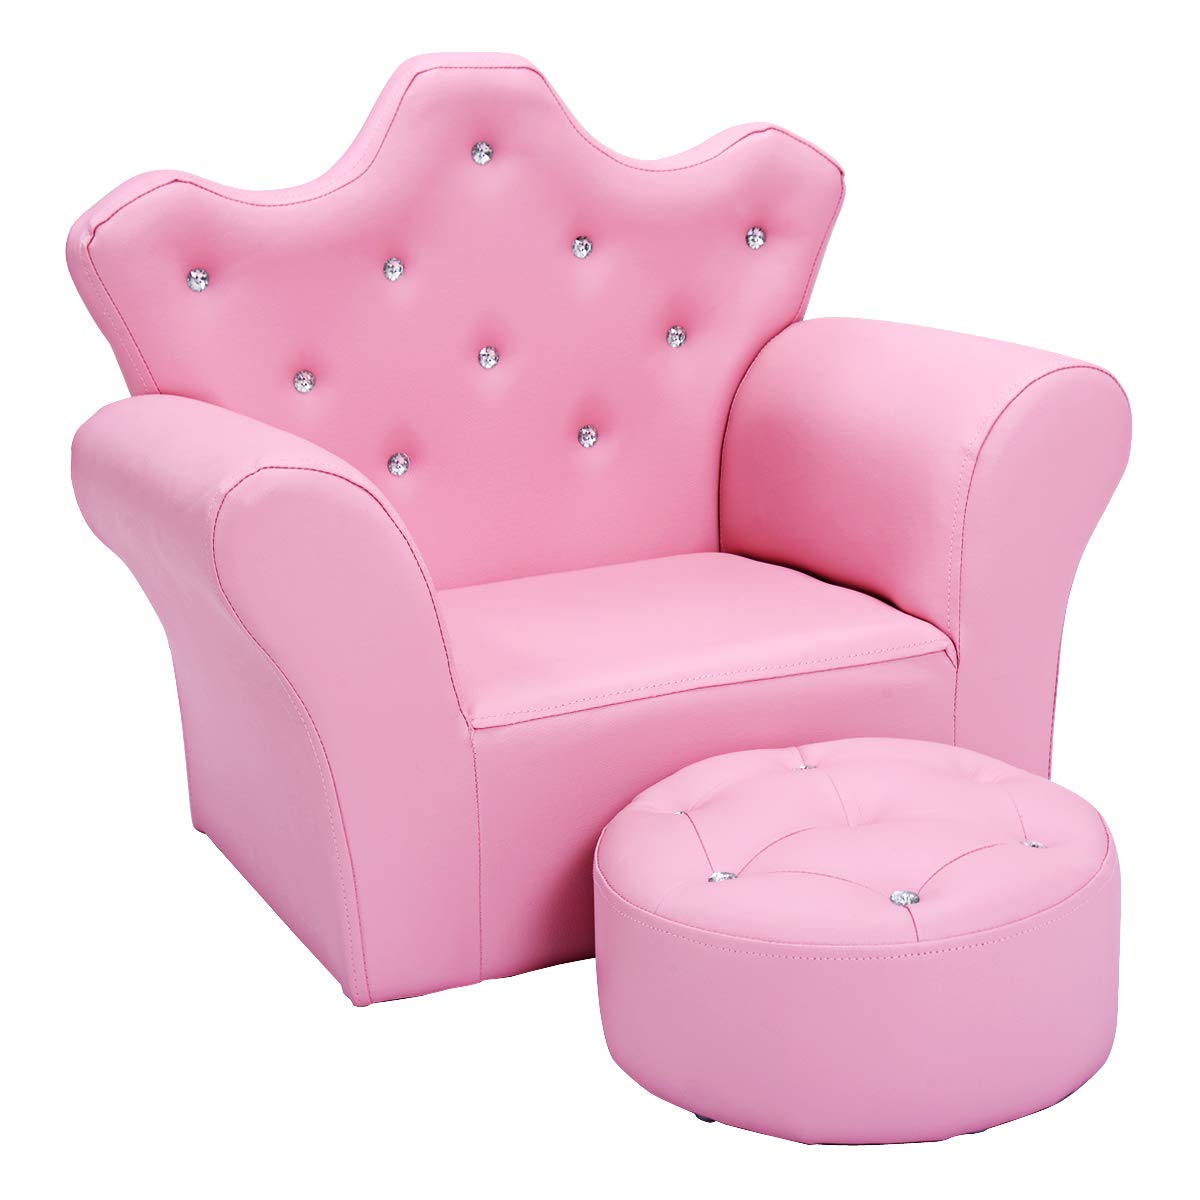 9 Best Princess Chair for Toddlers 2023 - Buying Guide 8